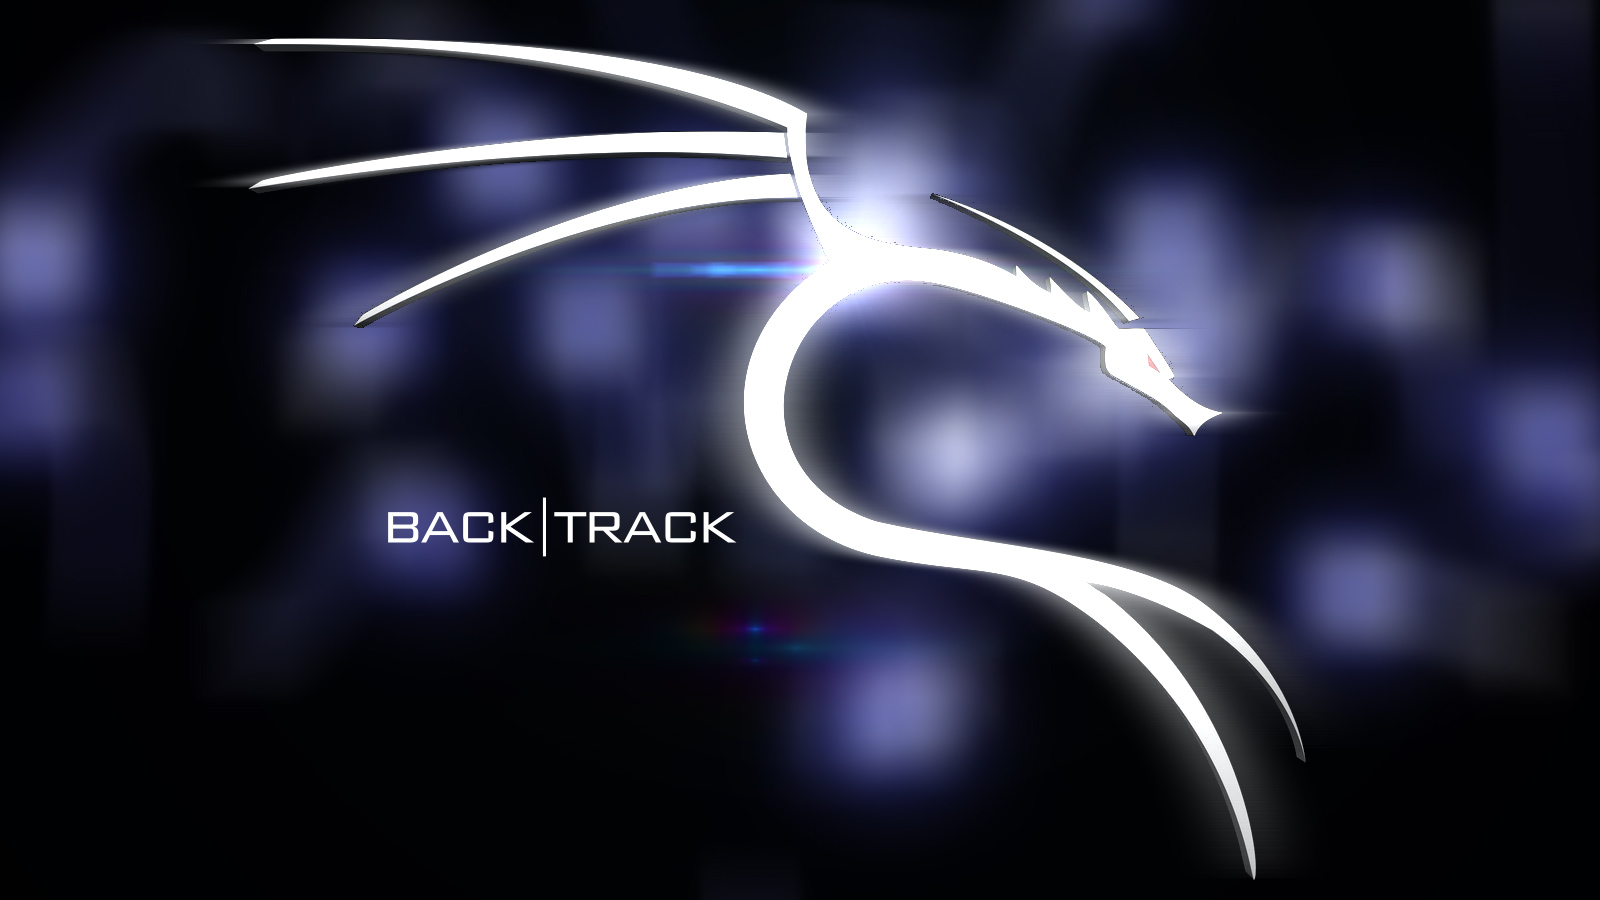 Updated Backtrack Wallpaper HD A Small Collection Of